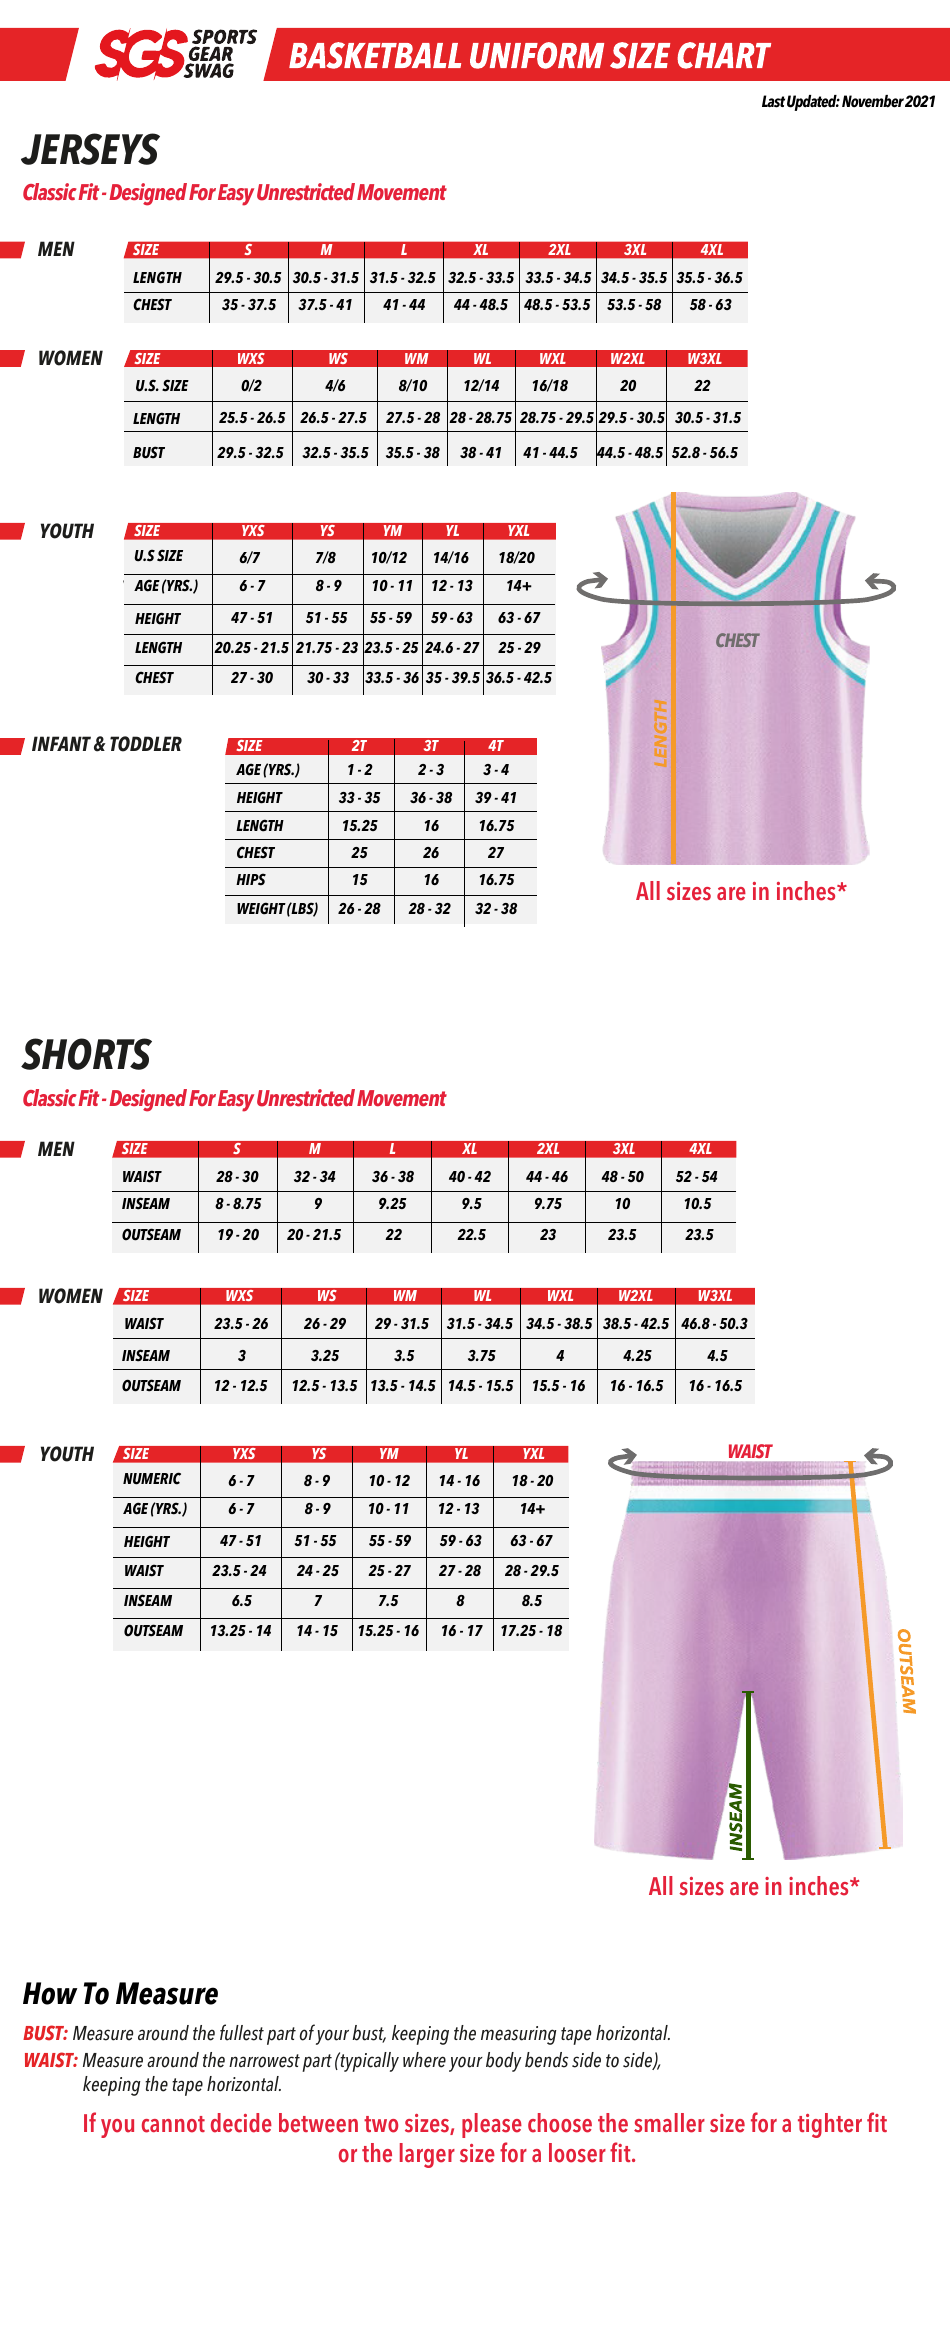 Basketball Uniform Size Chart - Sgs - Men, Women, Youth, Infant and Toddler